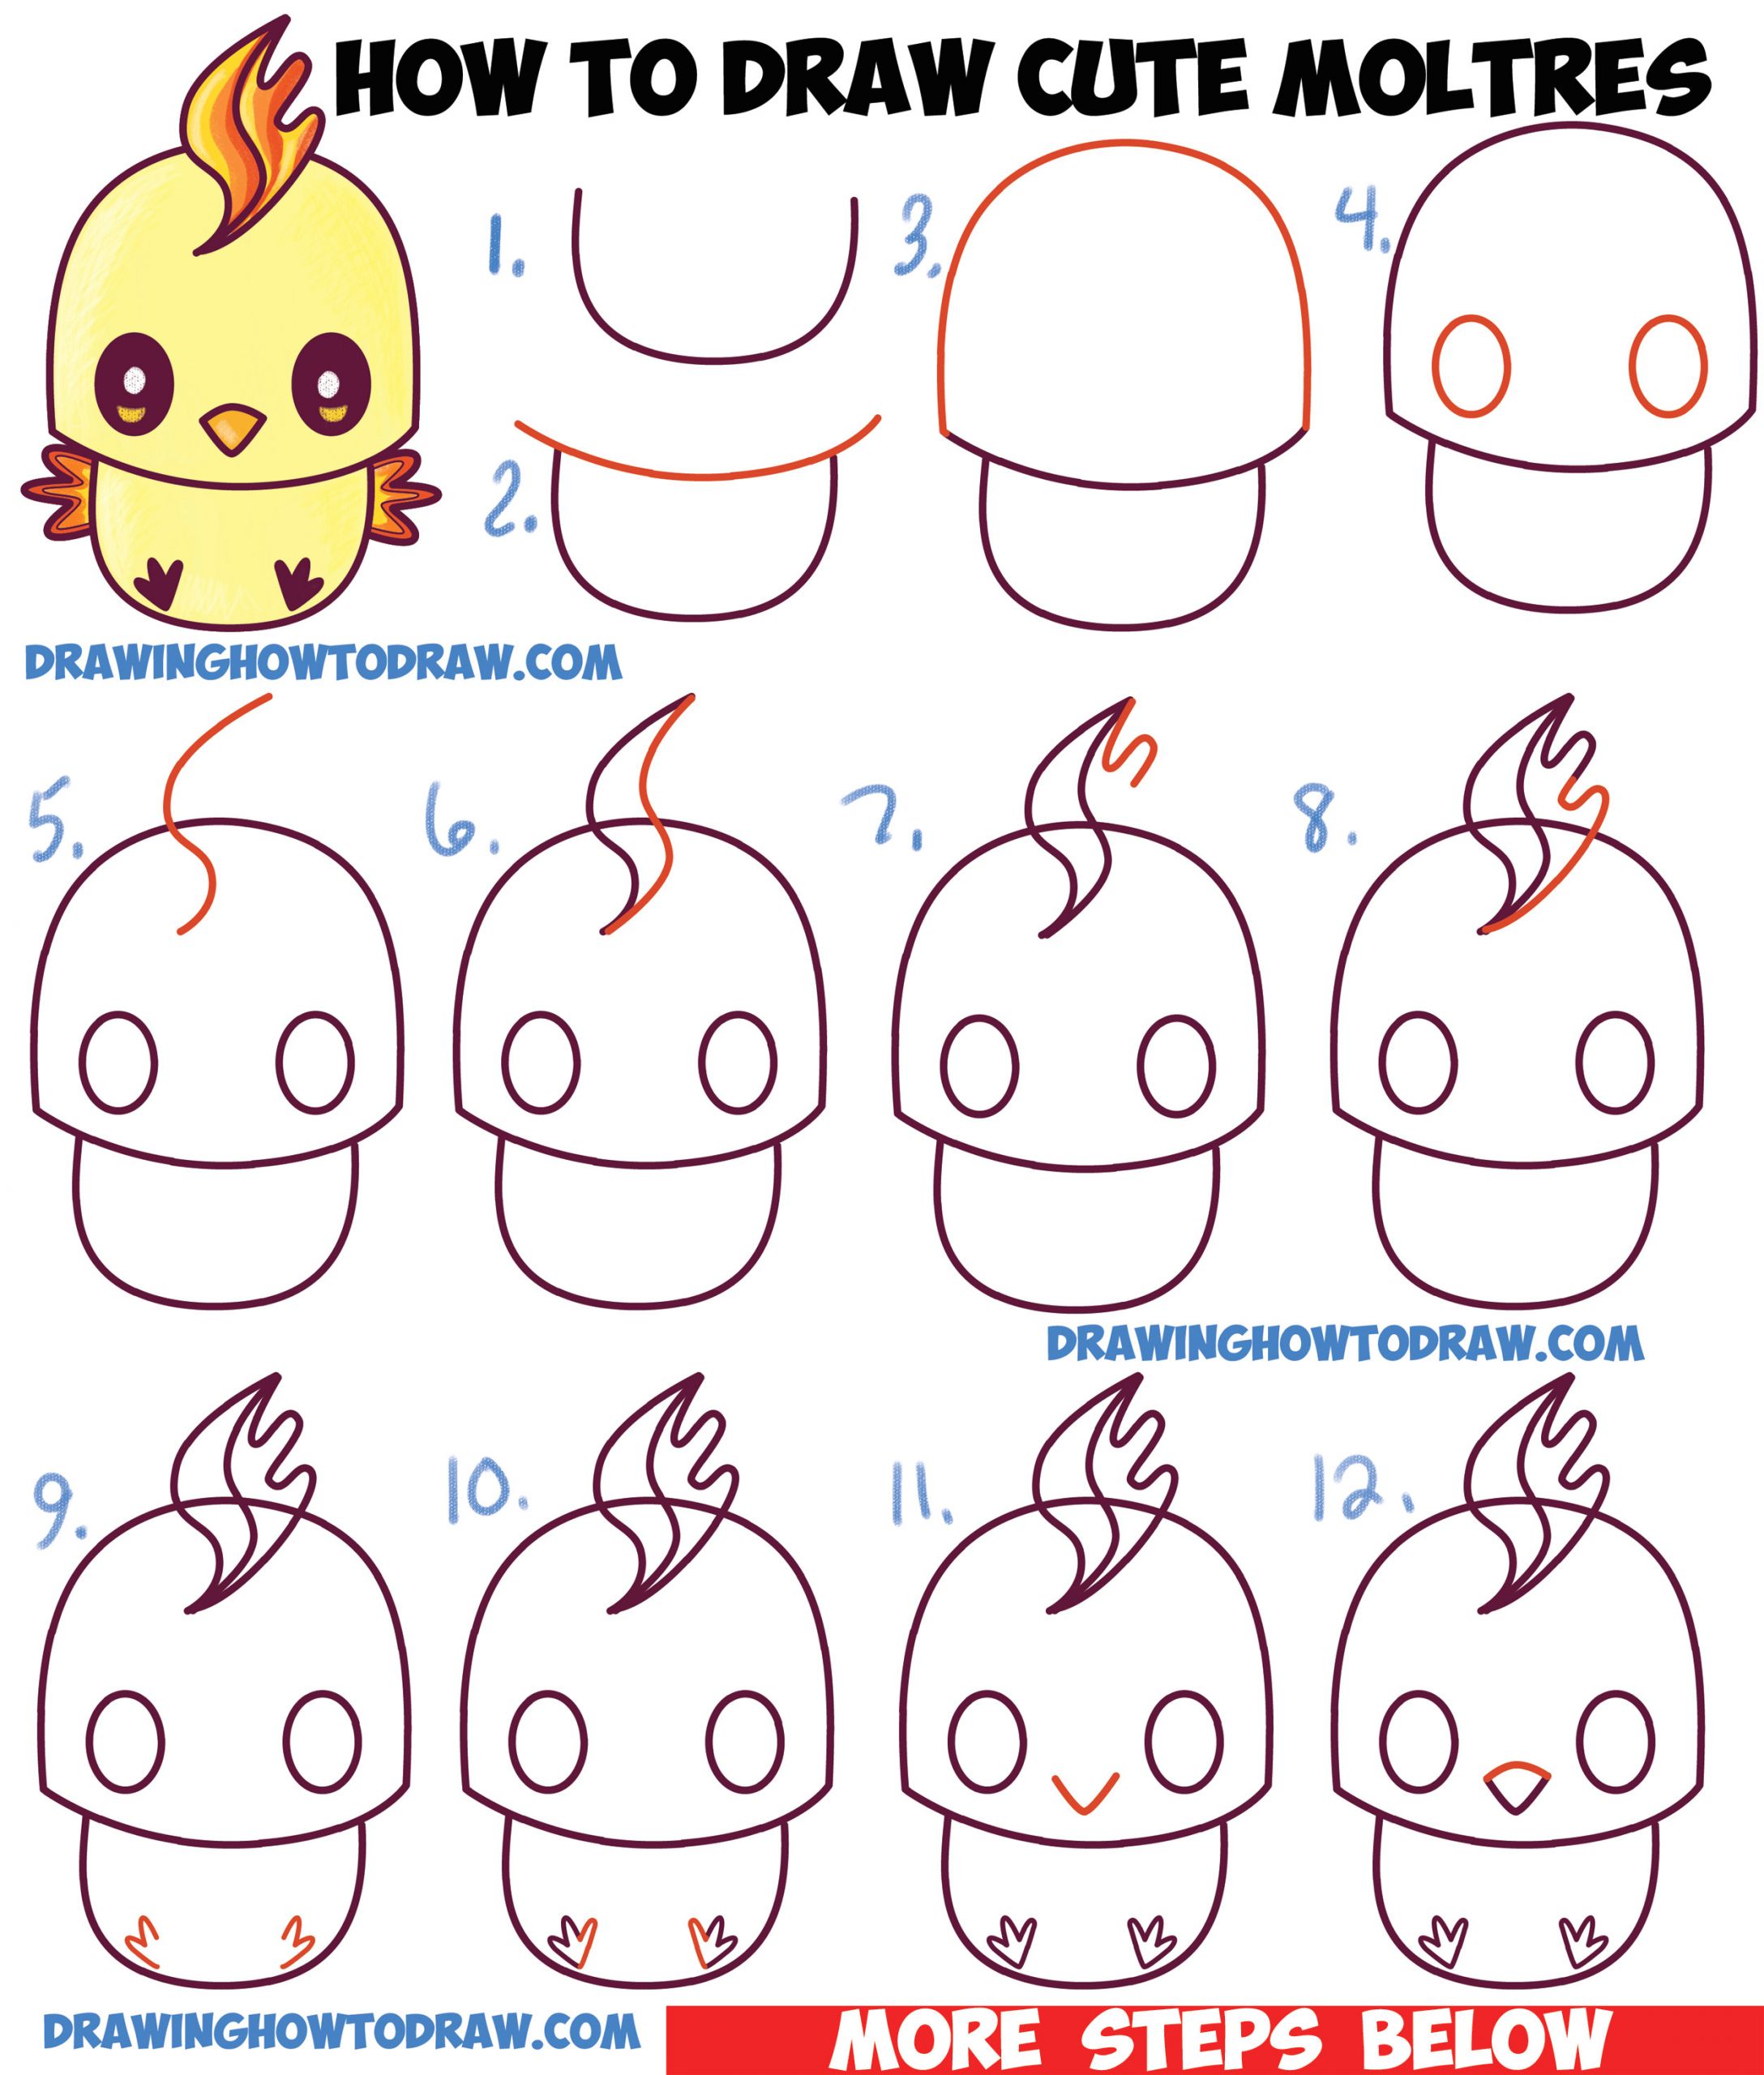 how to draw cute chibi kawaii moltres from pokemon easy step by step drawing tutorial beginners kids jpg